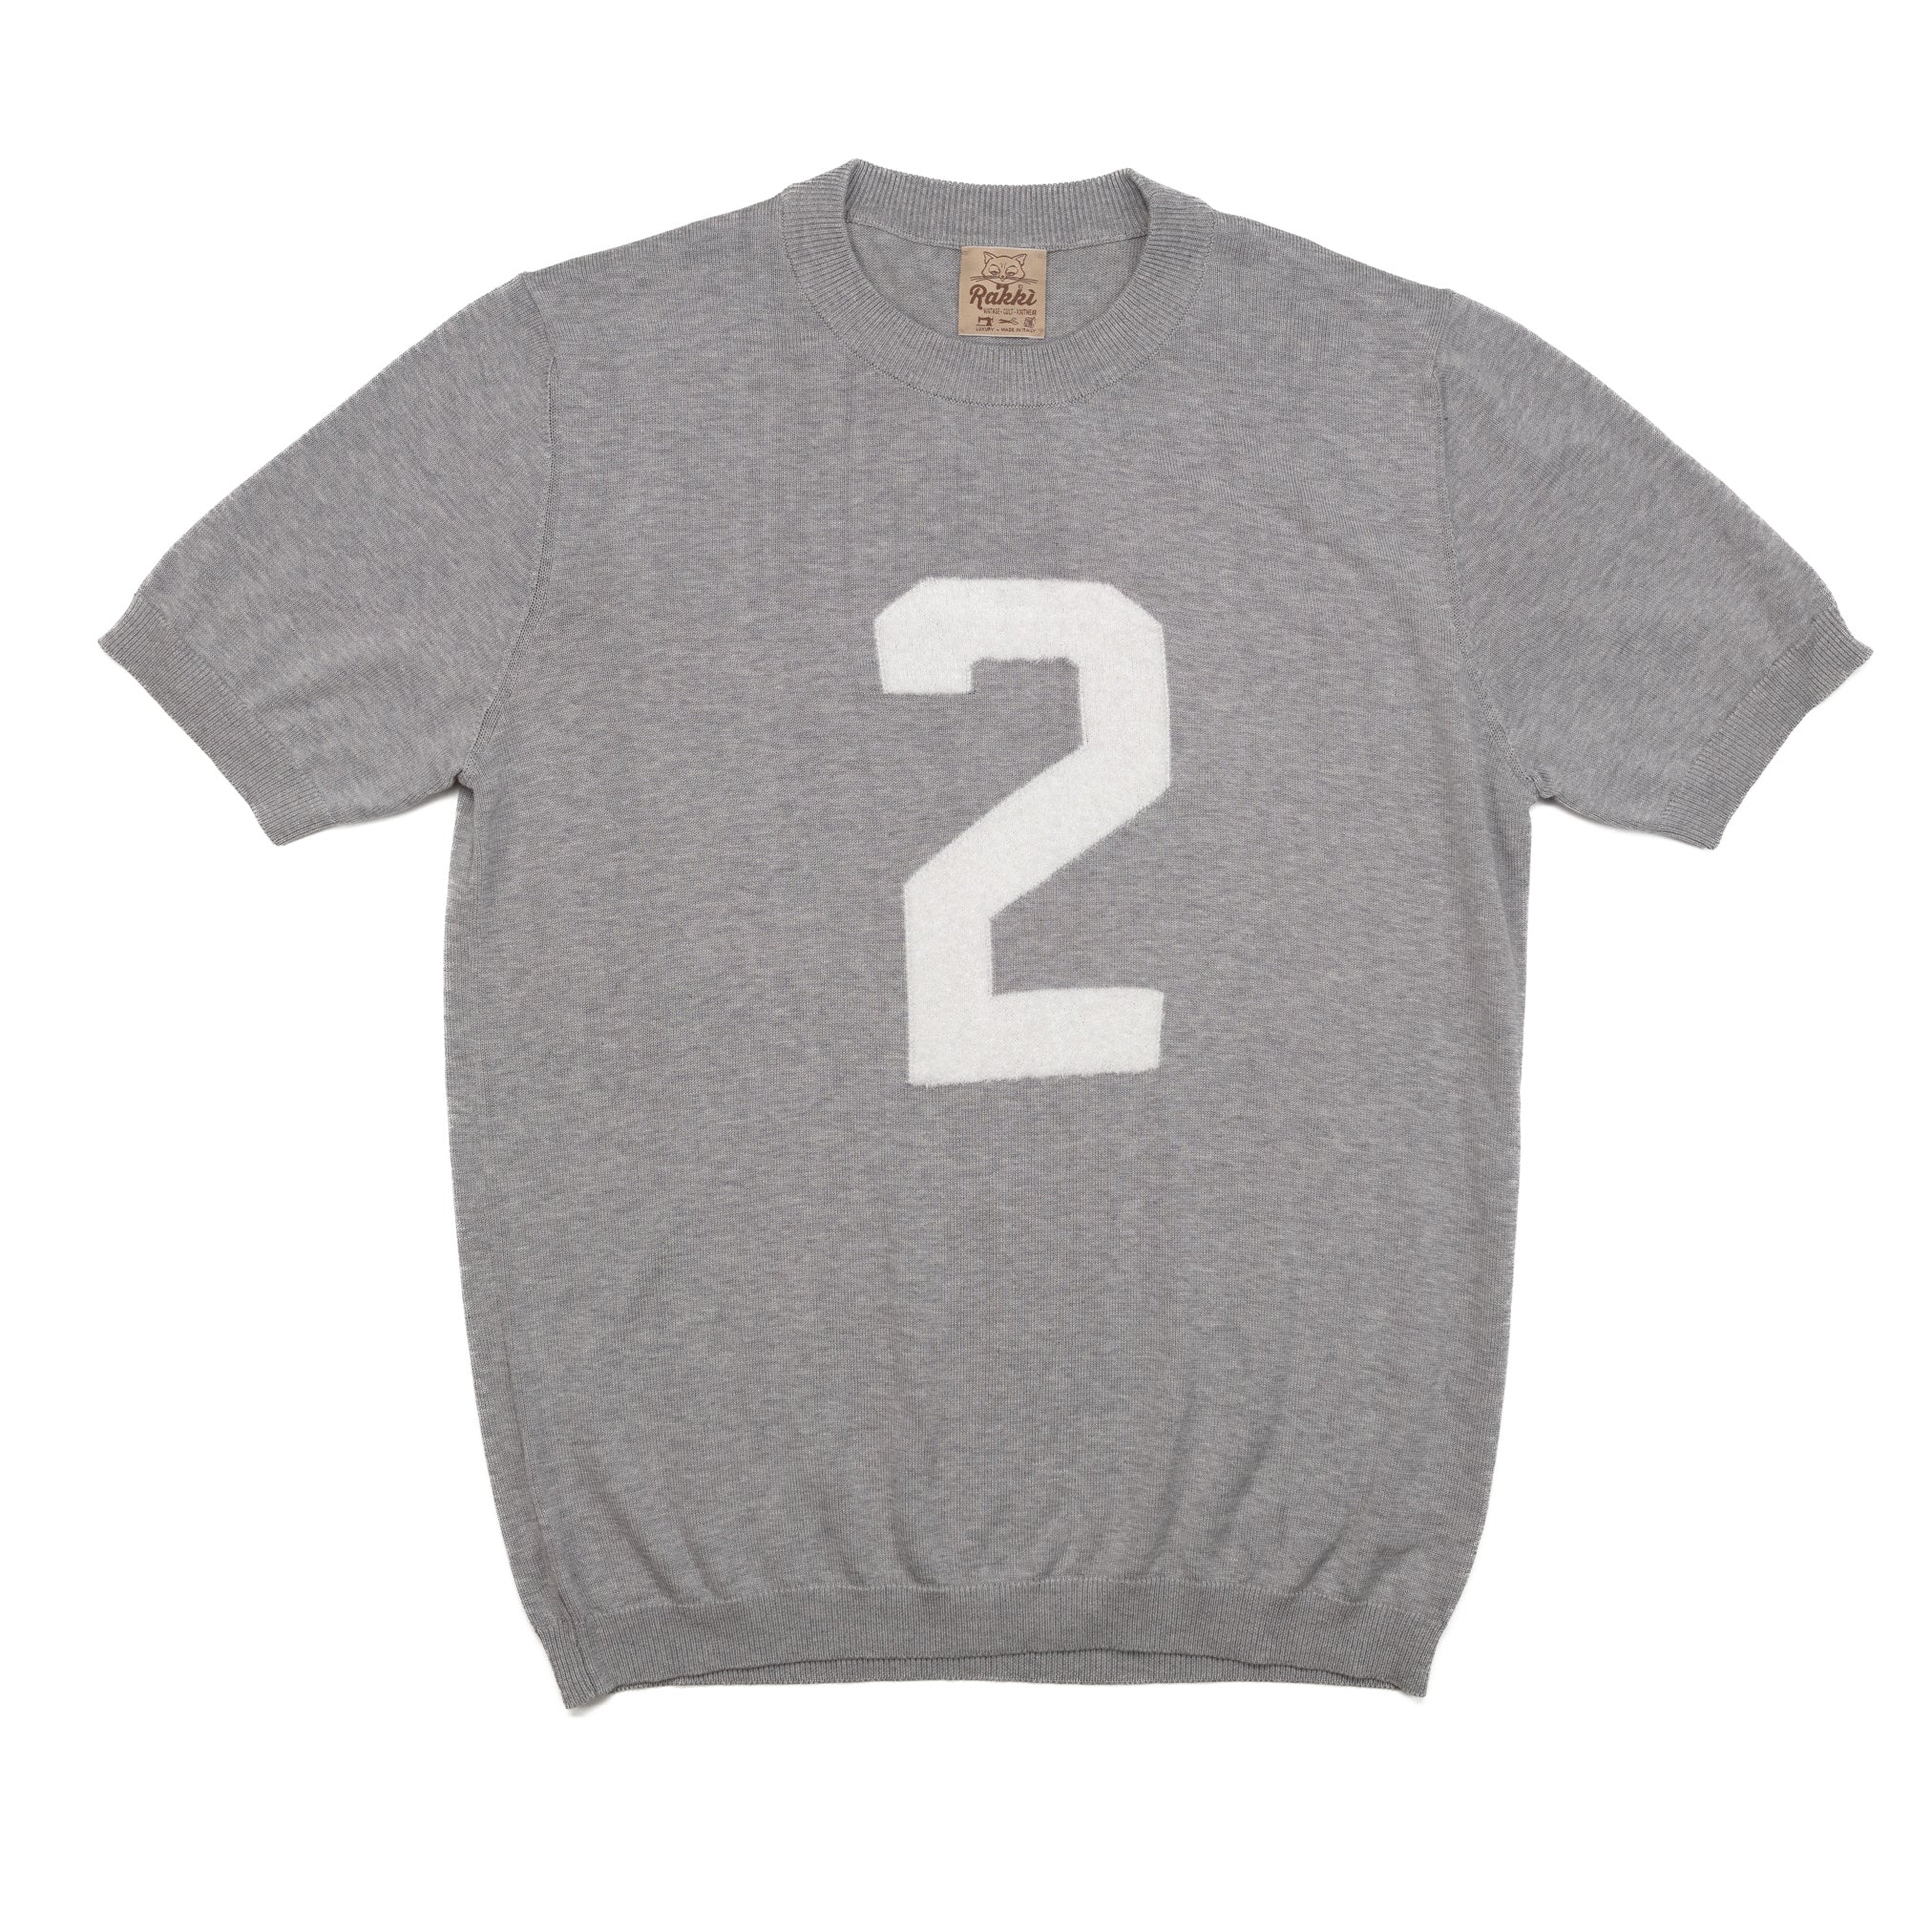 T Crown Shirt in Grey